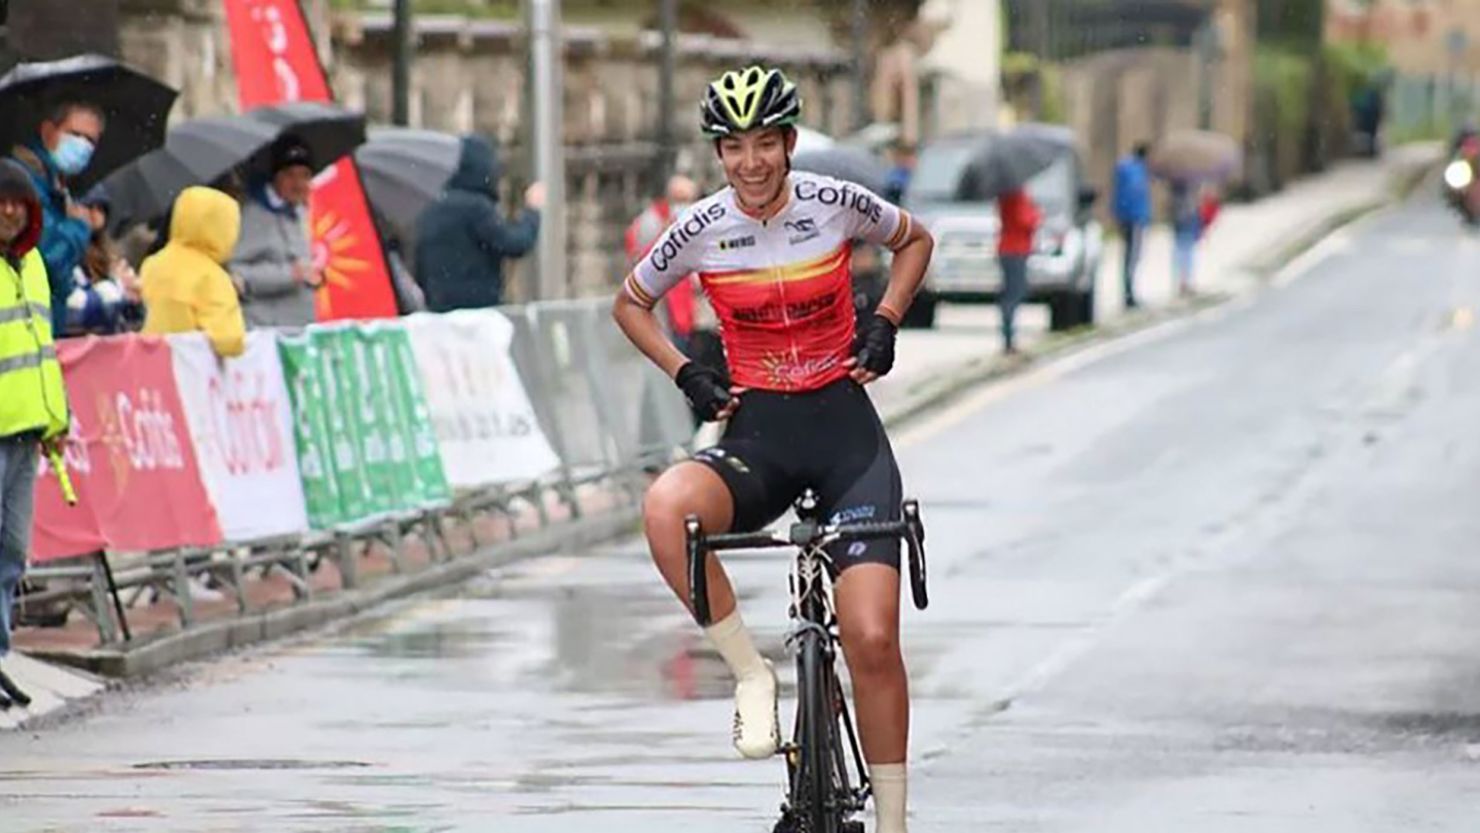 Estela Domínguez was described as one of Spain's "most promising national riders."